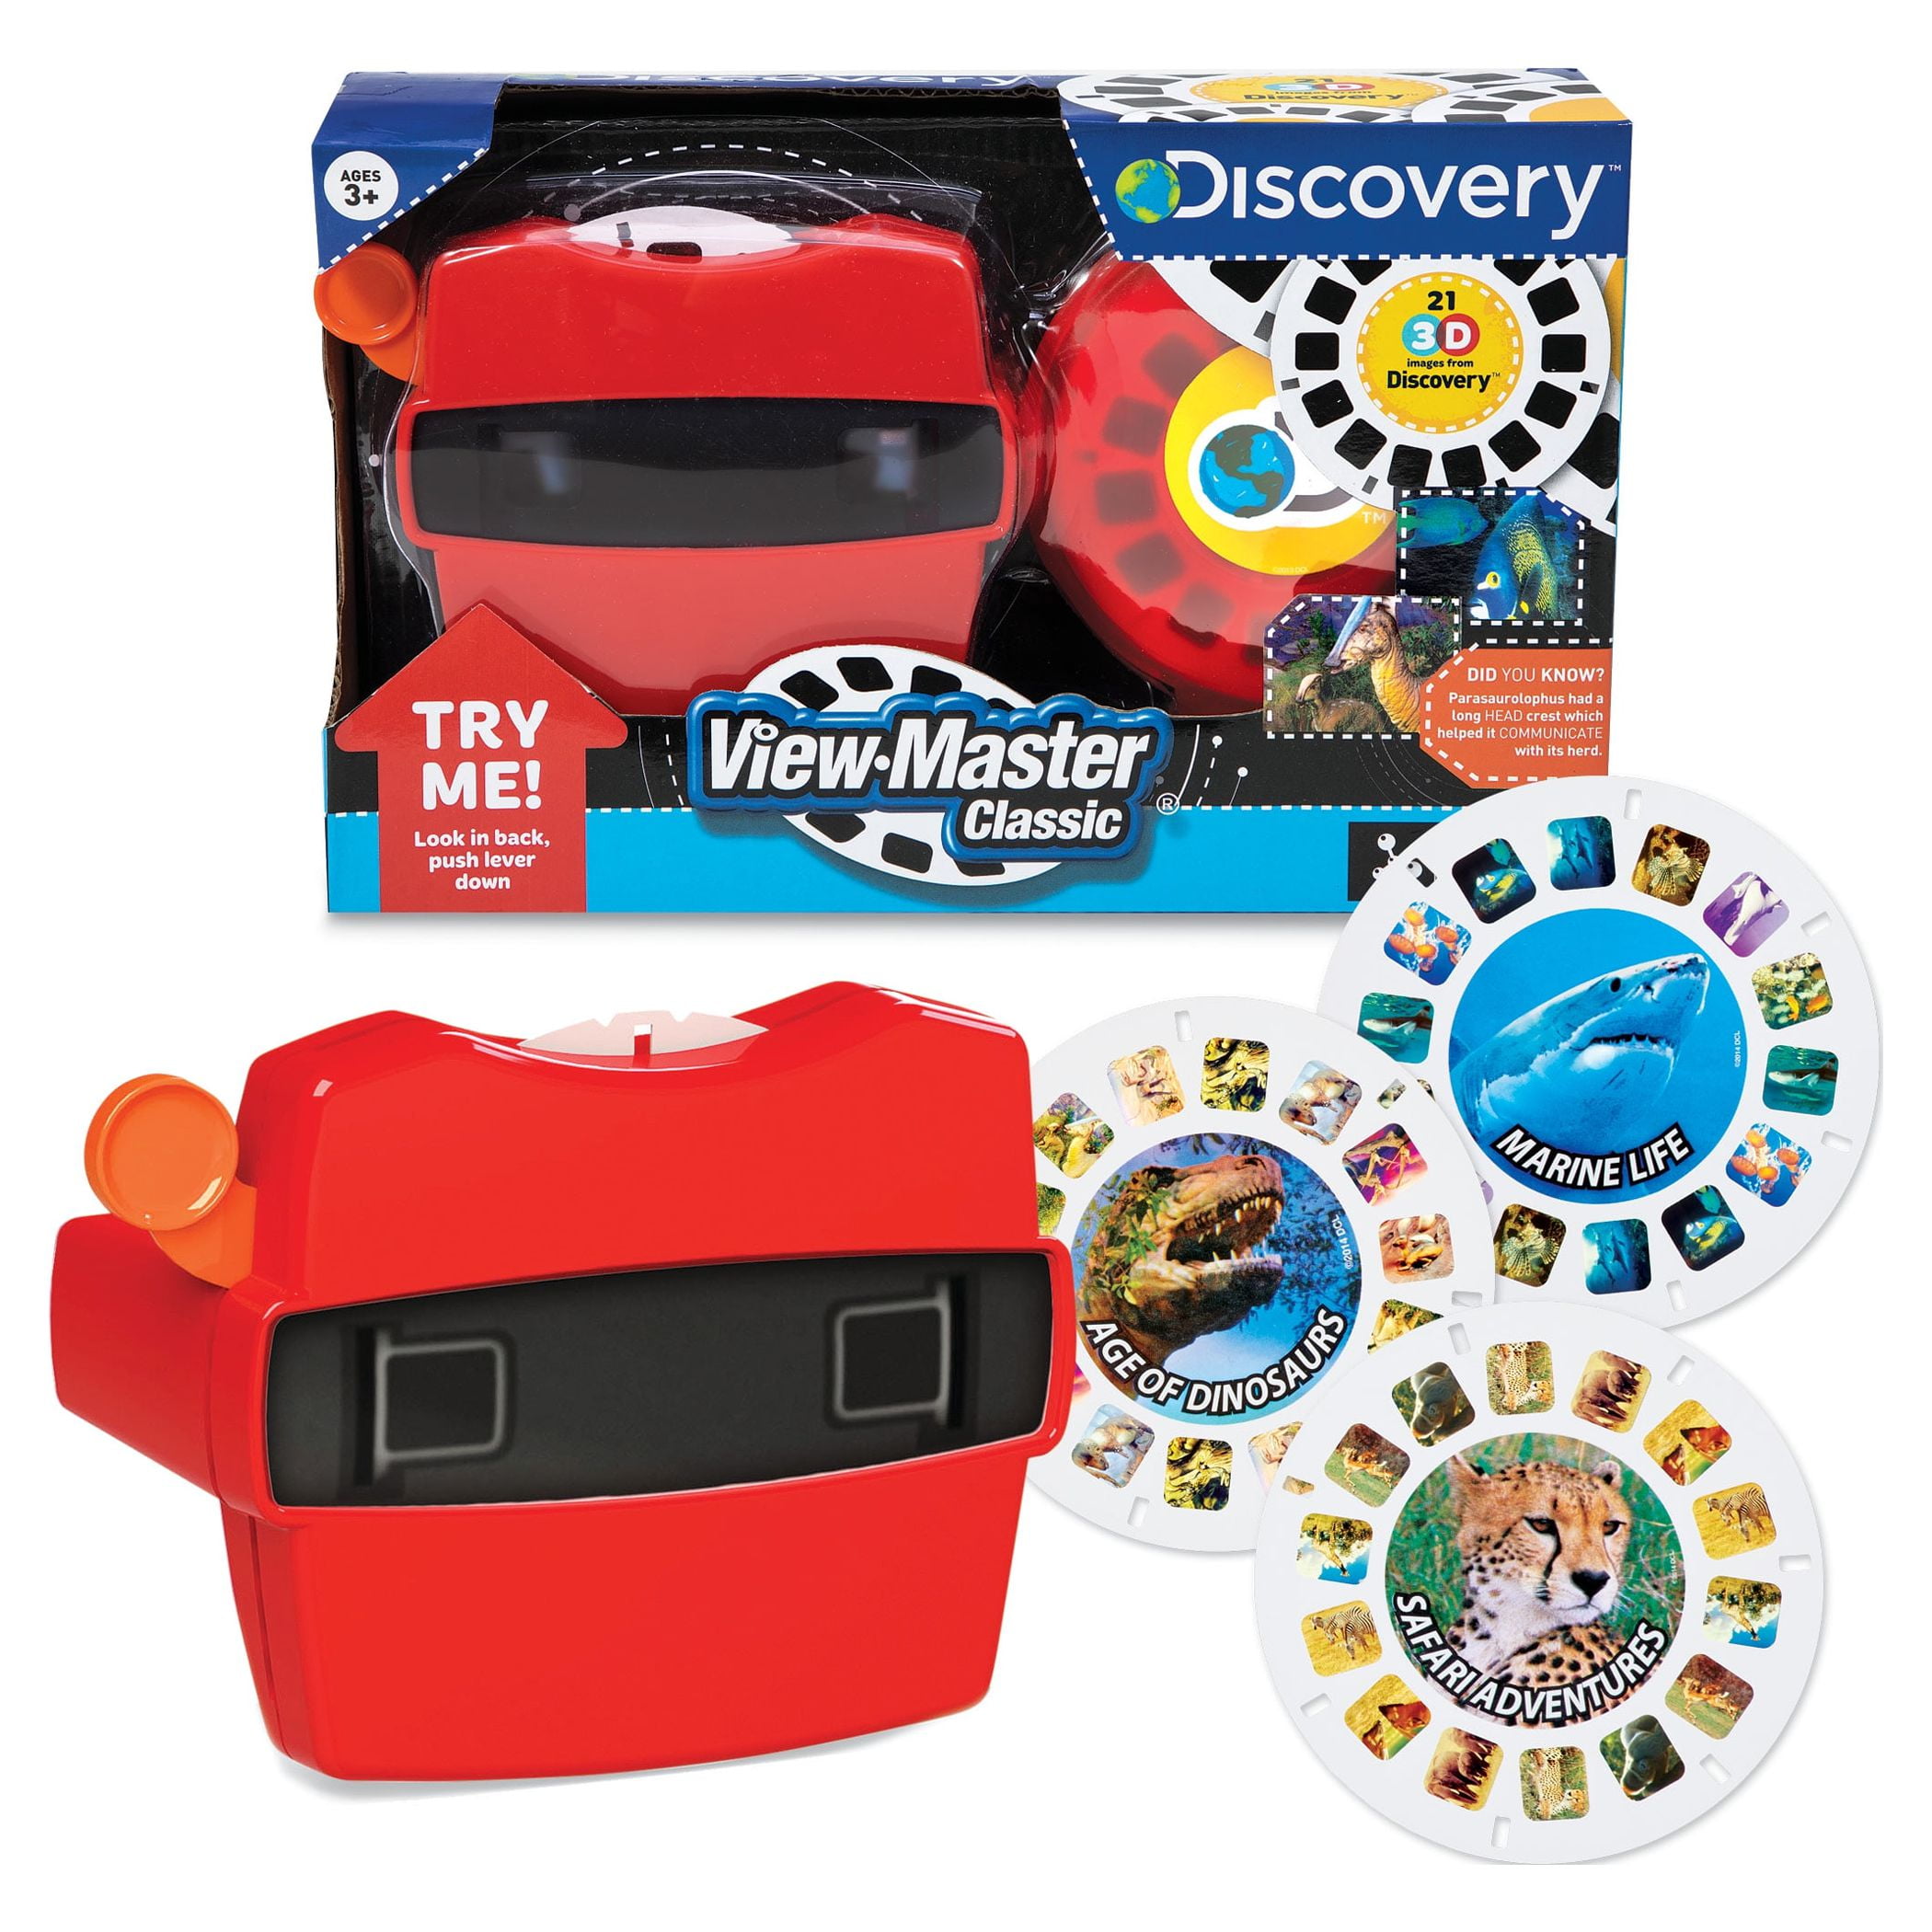 View Master Classic 3D Image Real Viewer Toy Boxed Set 